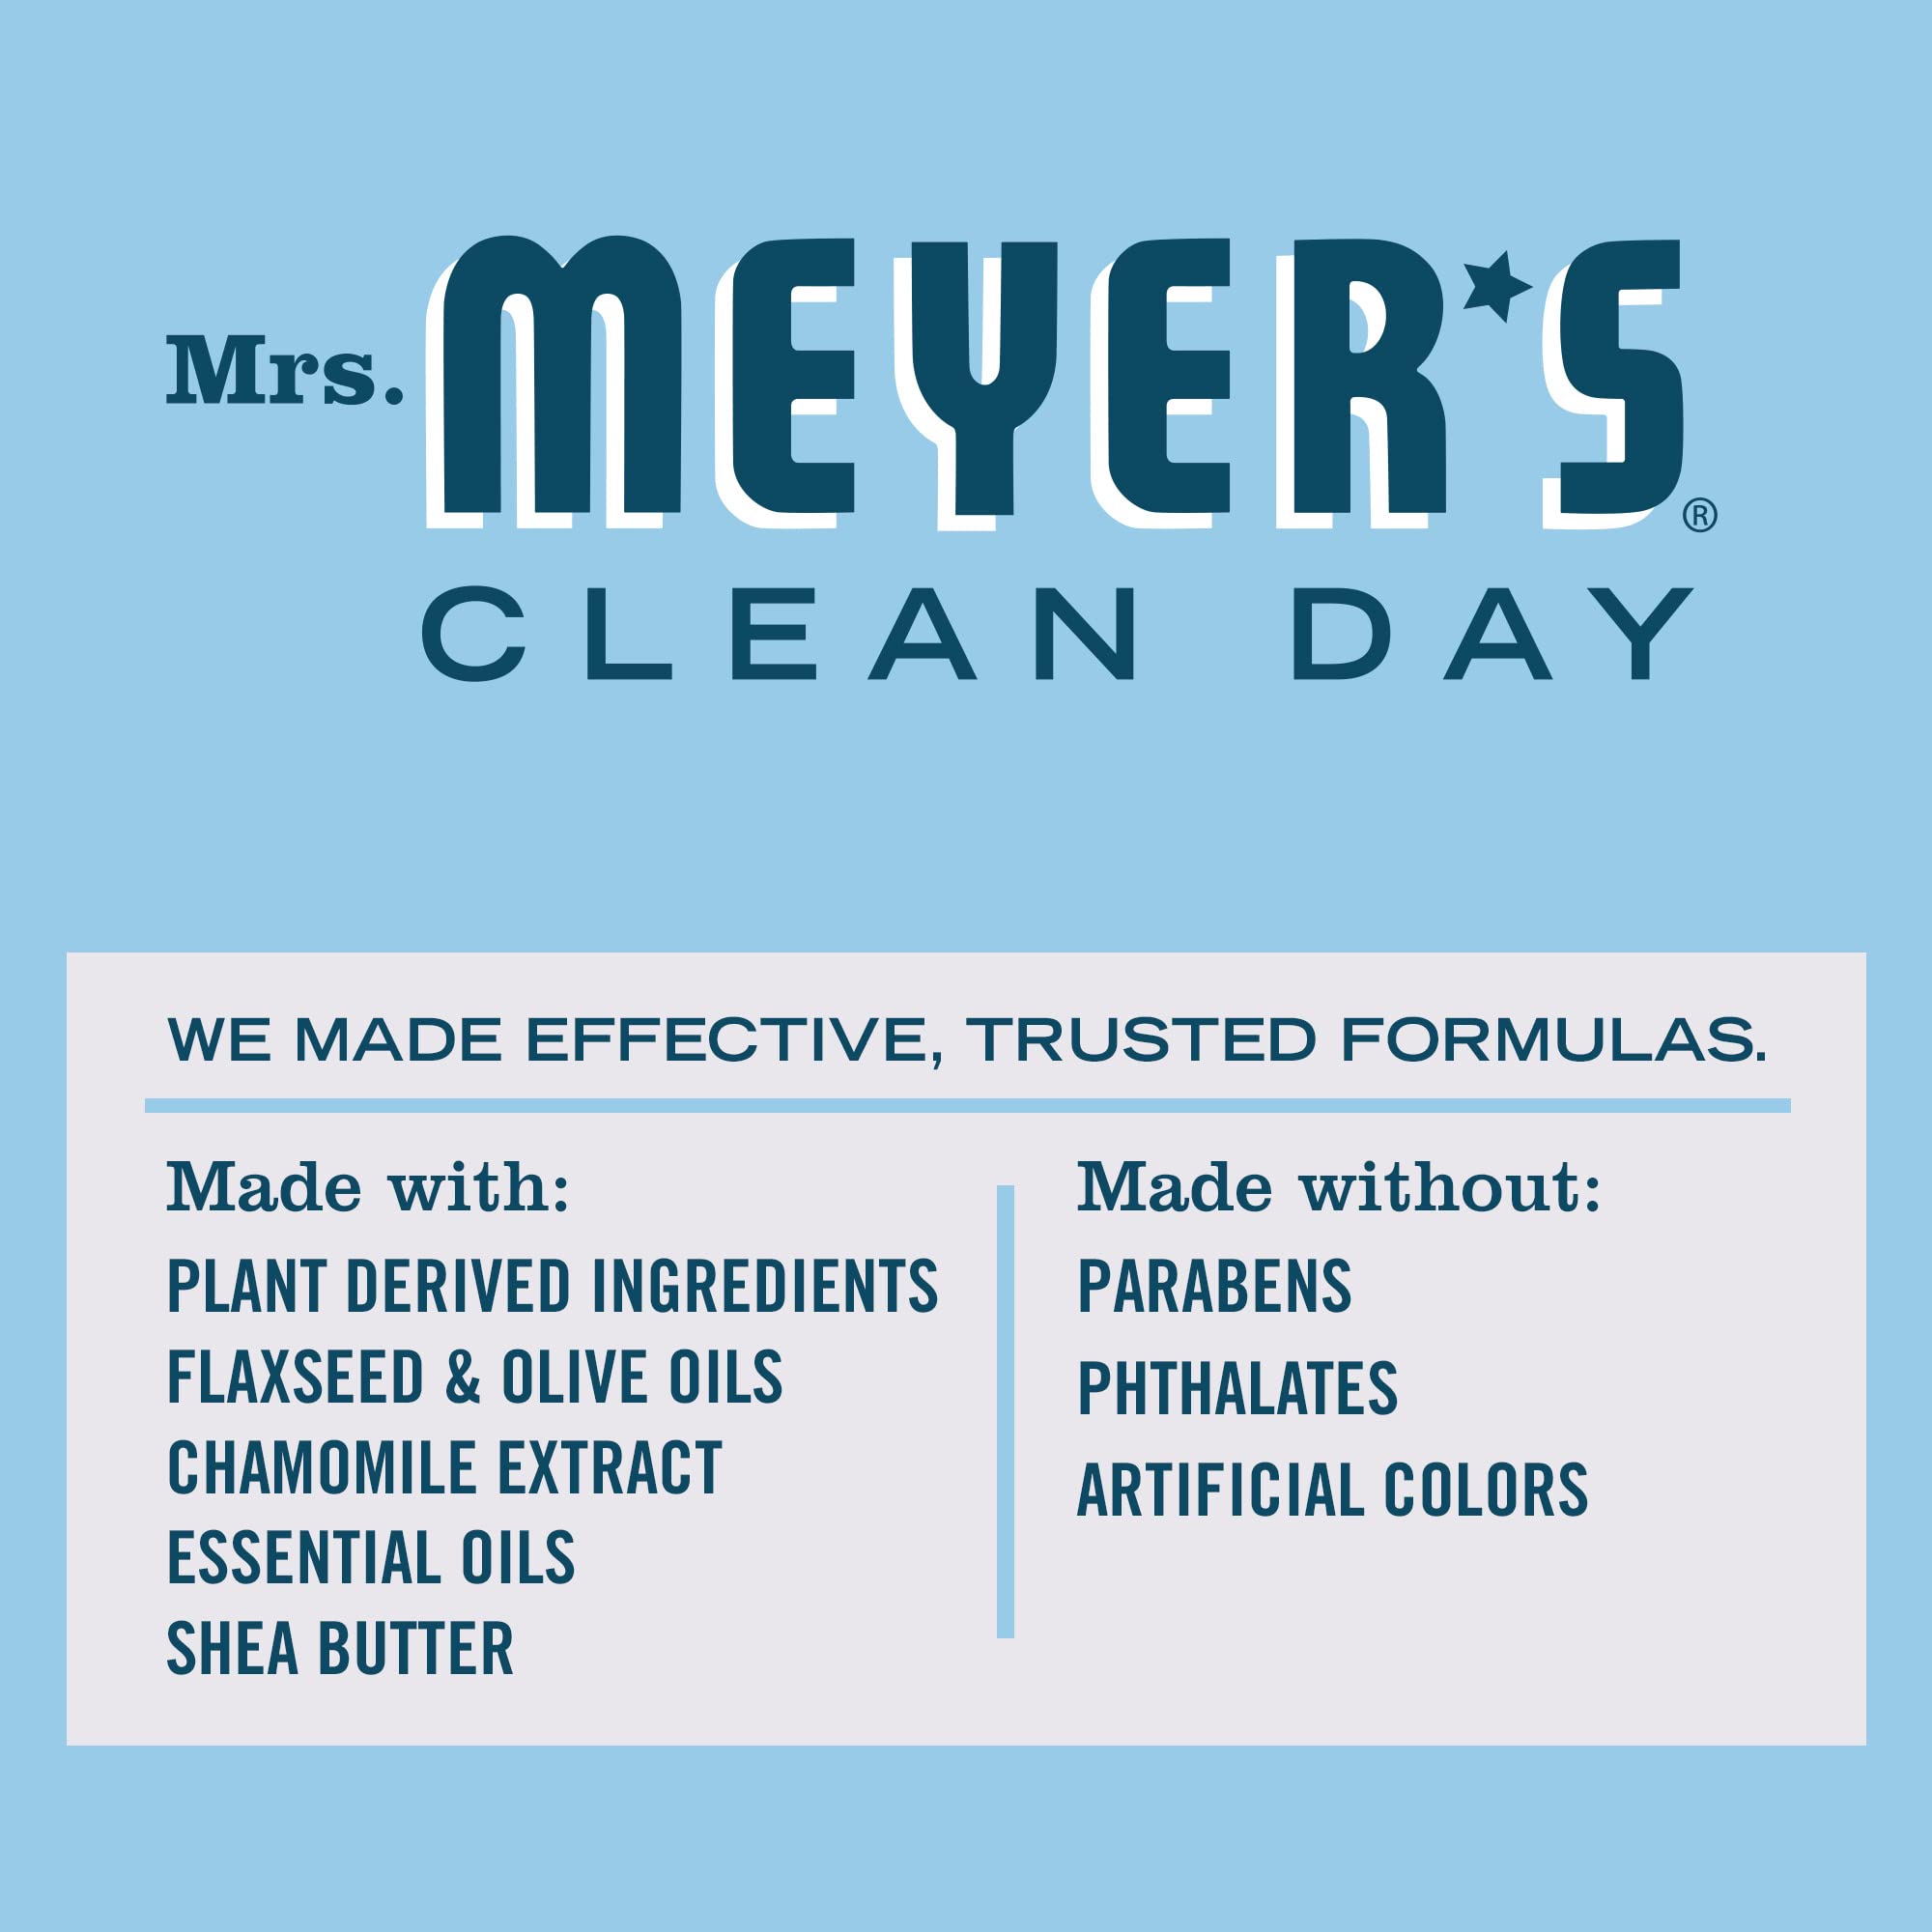 MRS. MEYER'S CLEAN DAY Body Lotion for Dry Skin, Non-Greasy Moisturizer Made with Essential Oils, Rain Water, 15.5 oz